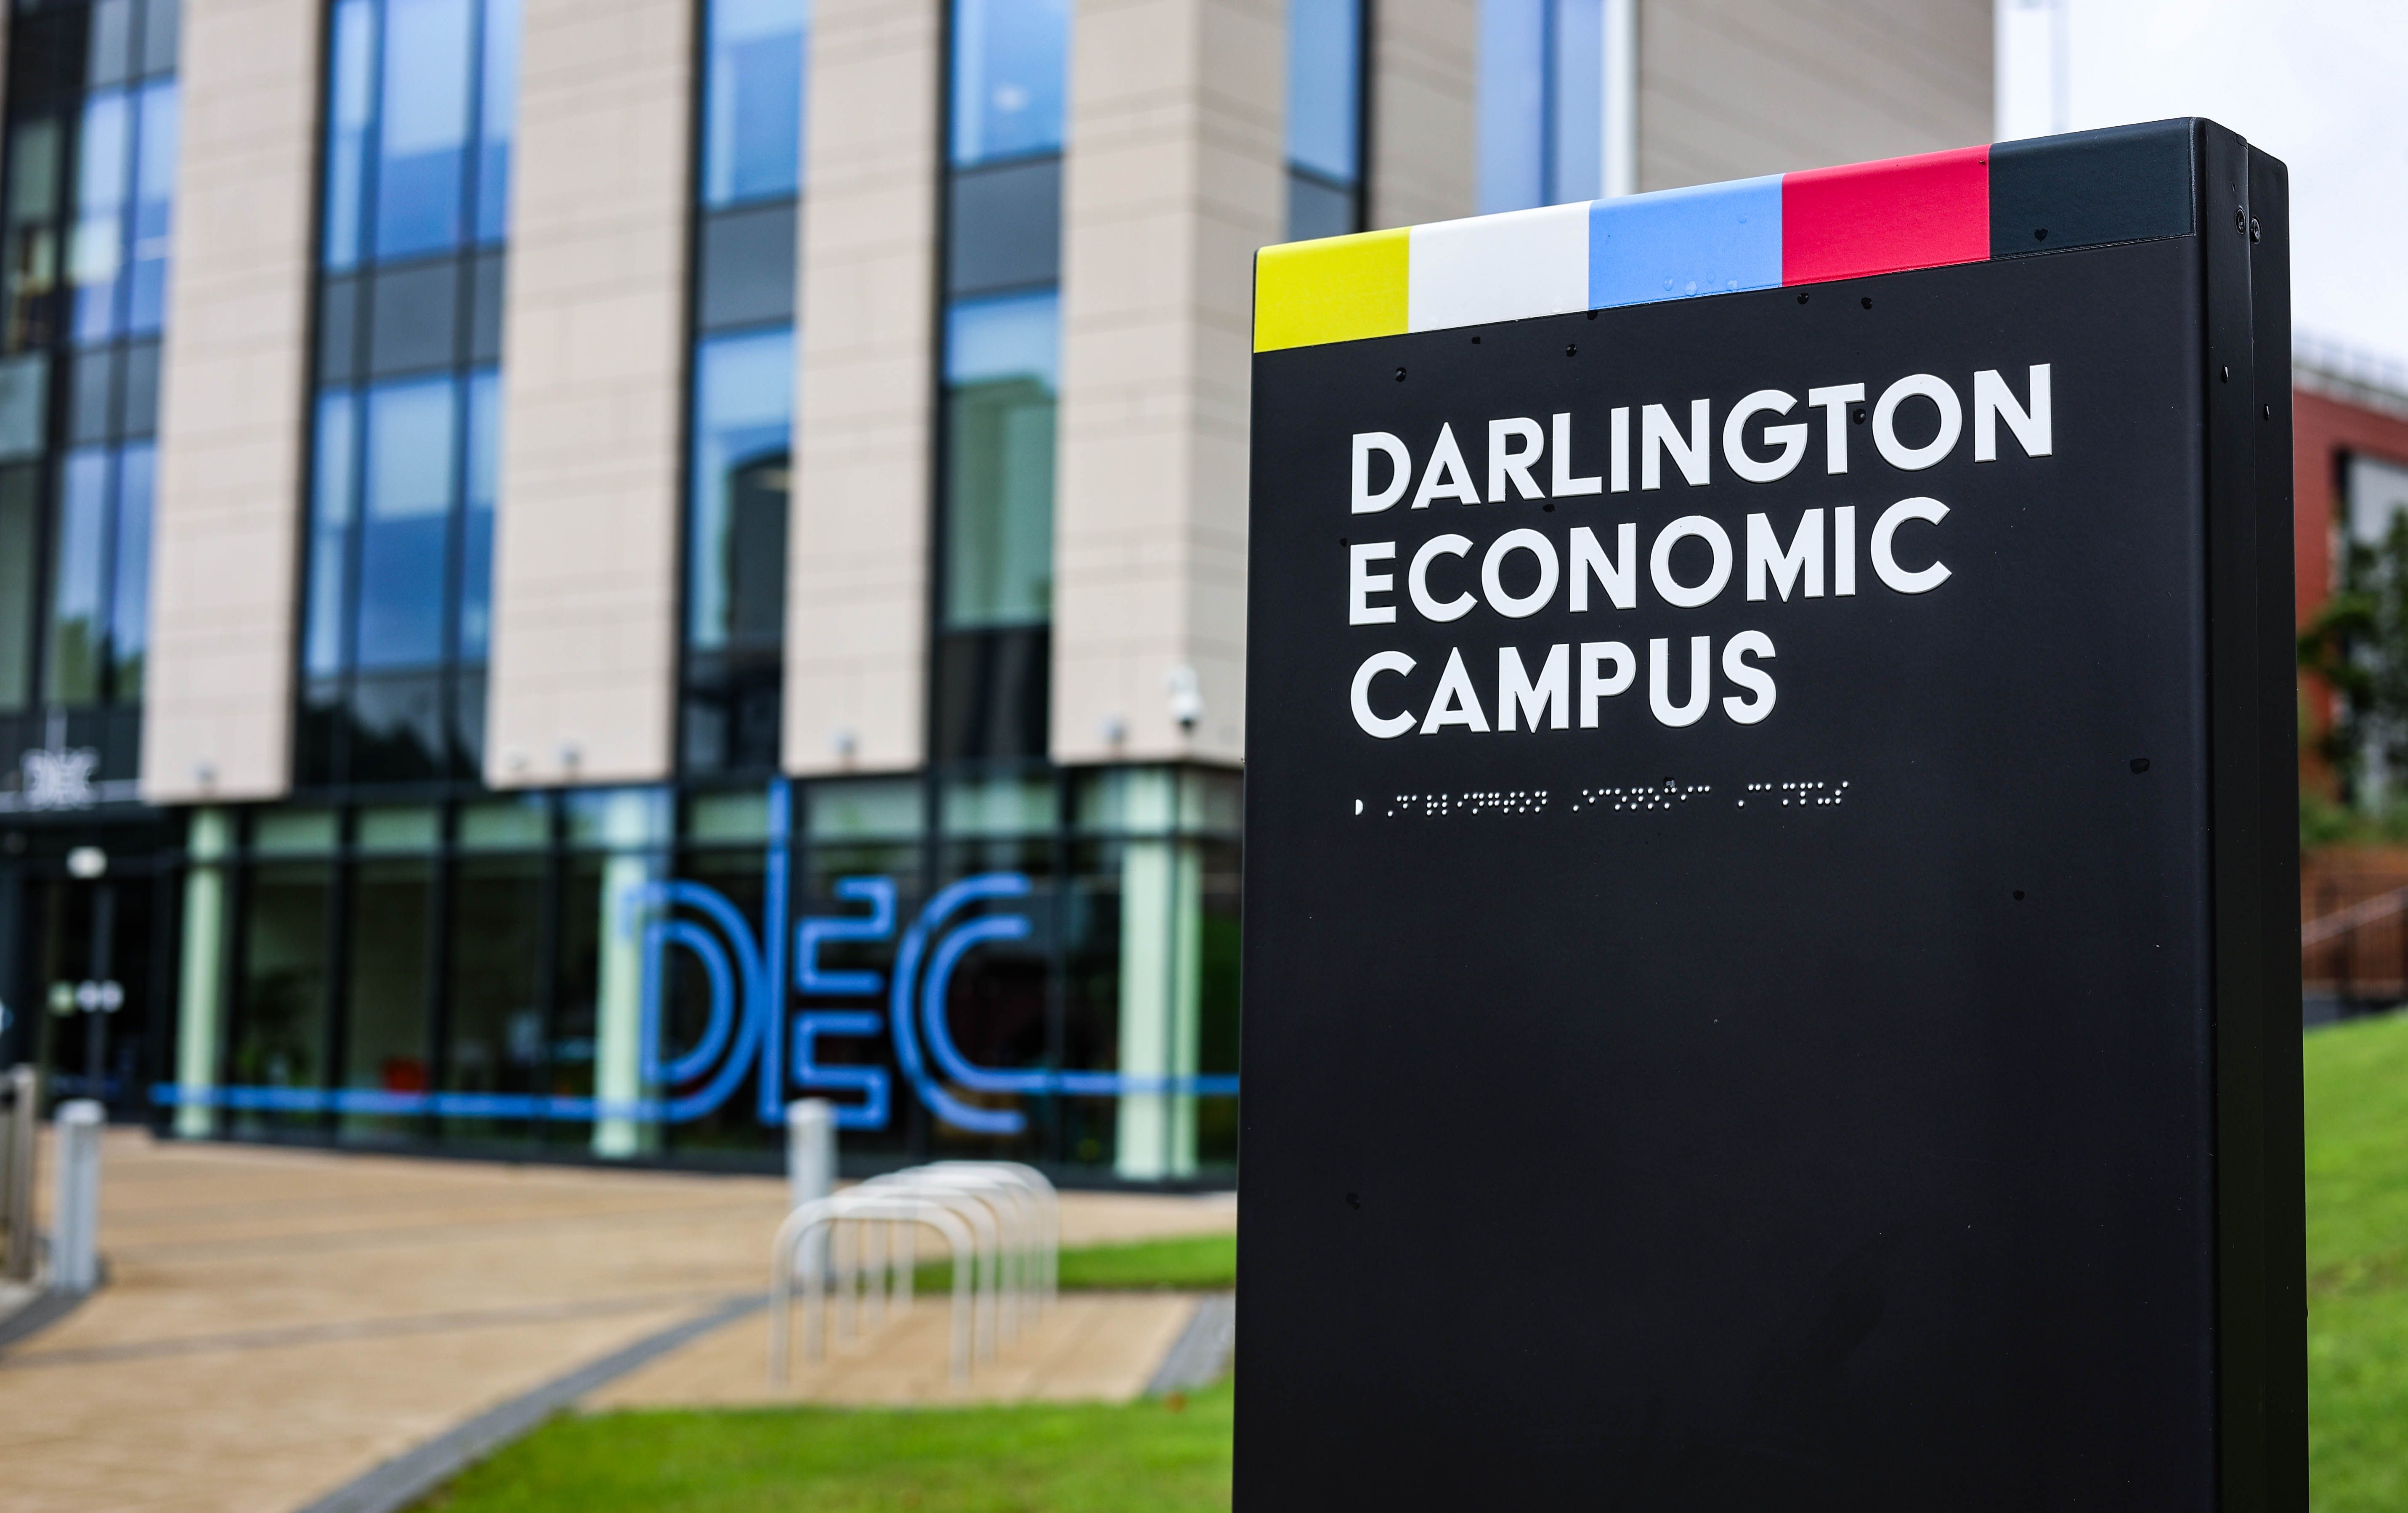 Outside Darlington Economic Campus in front of the building with a sign in the foreground